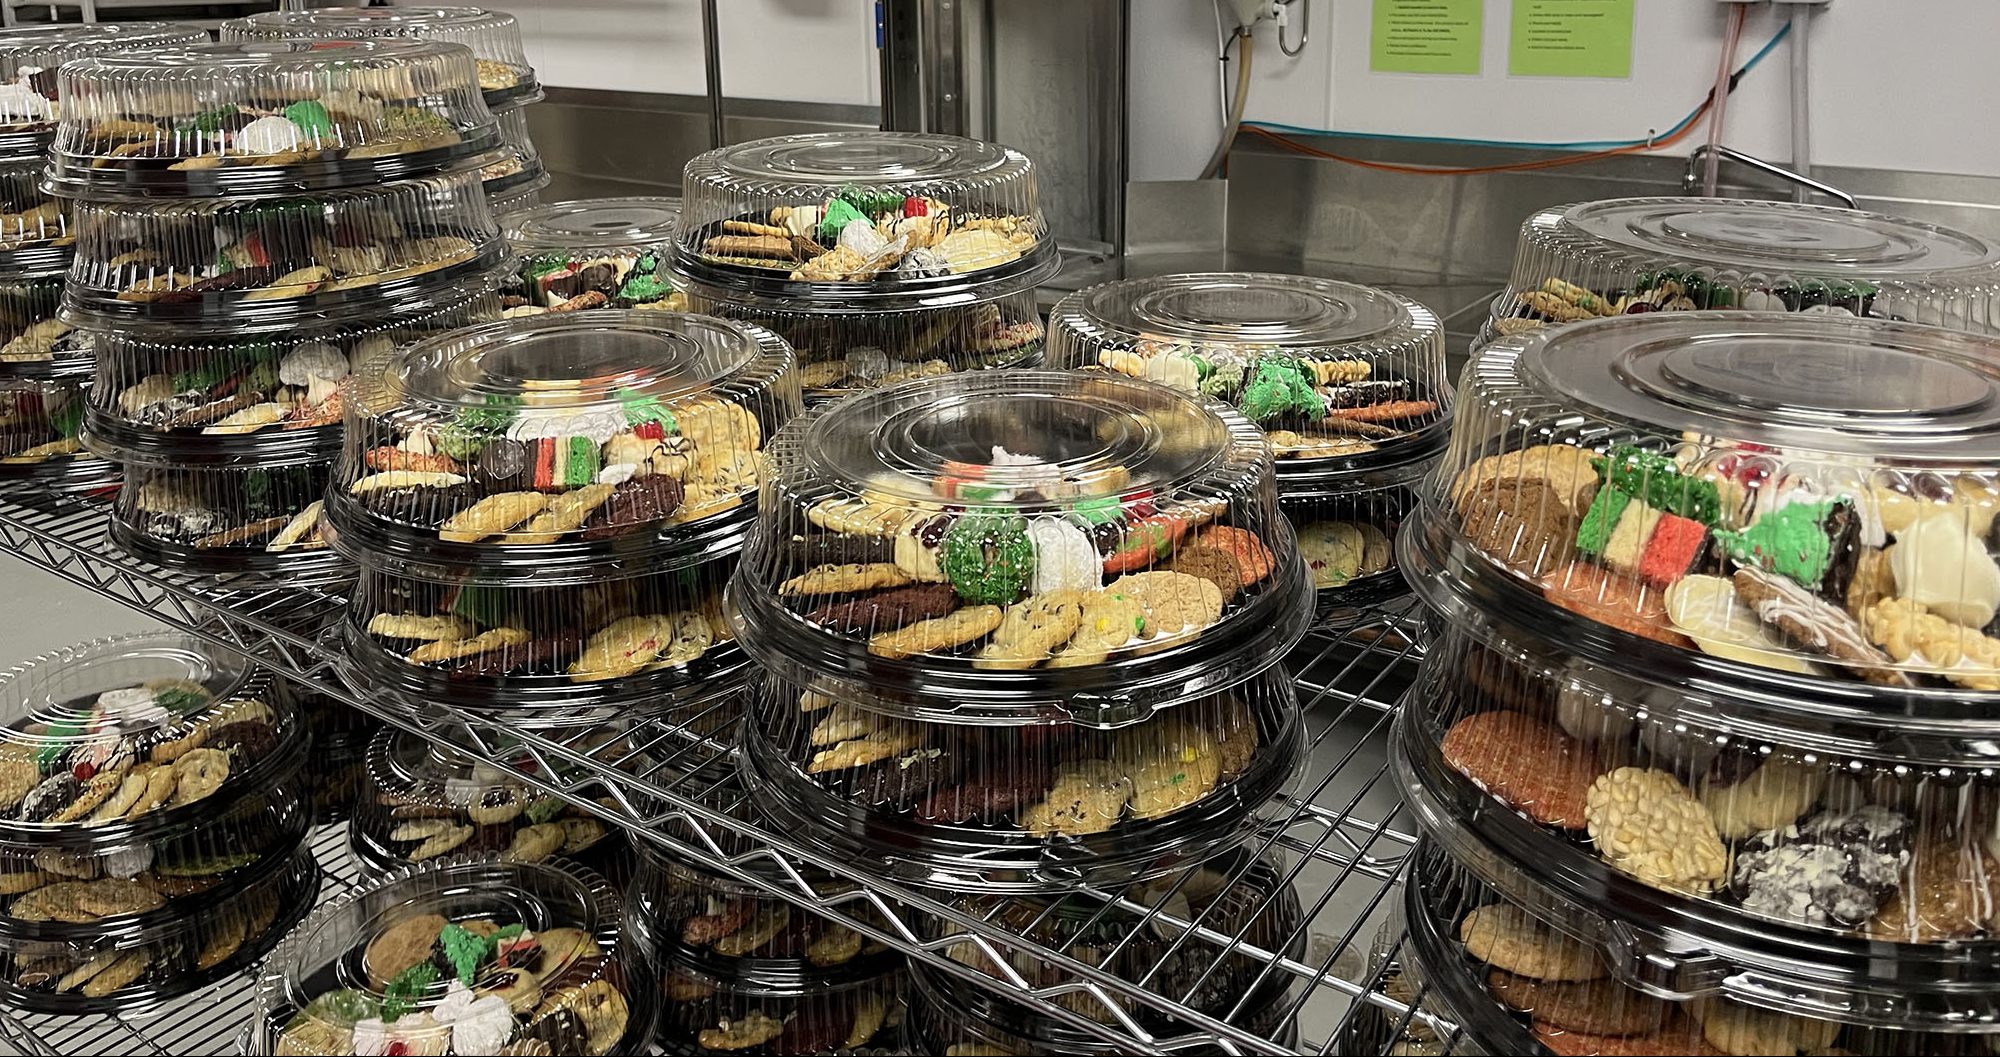 Several dozens of cookies neatly arranged on their respective plates, stand on shelves, prepared to be sold.